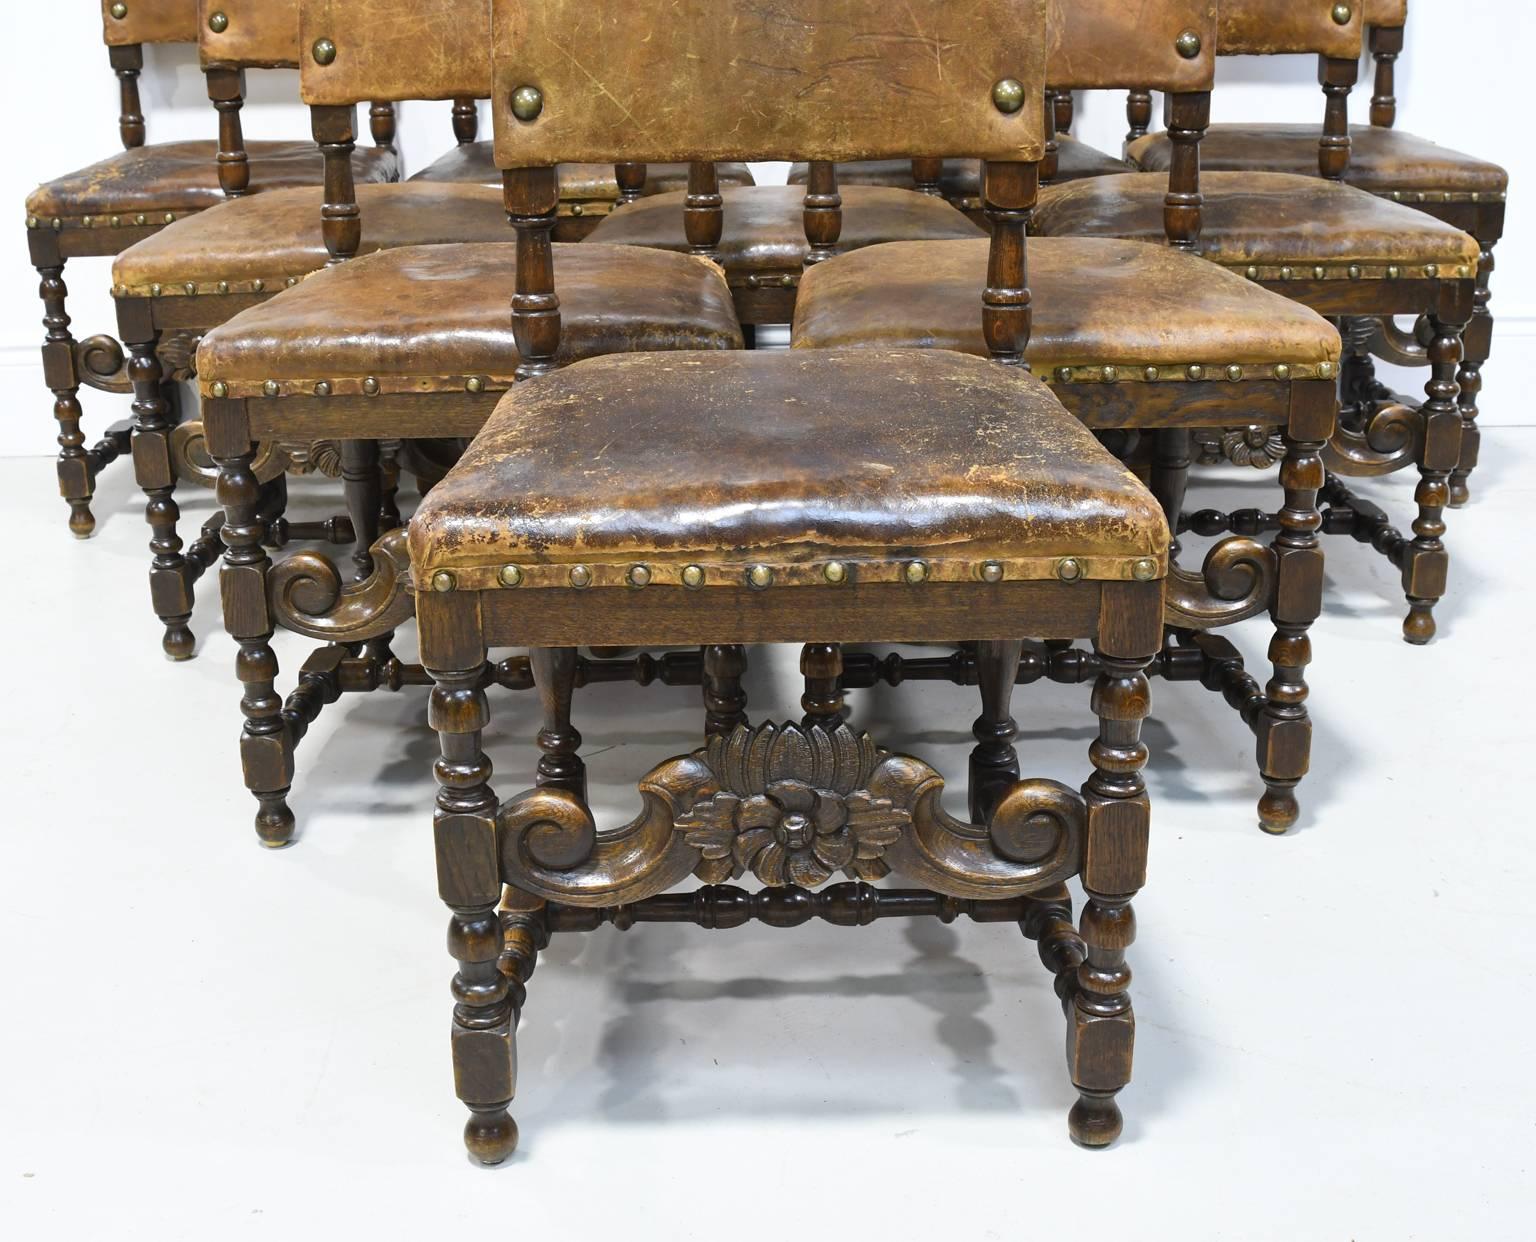 From the Belle Époque period, a set of ten exceptional Renaissance style Italian dining chairs in walnut with large comfortable seats and backs upholstered in the original brown leather, bordered with large, decorative brass nailheads. Legs are